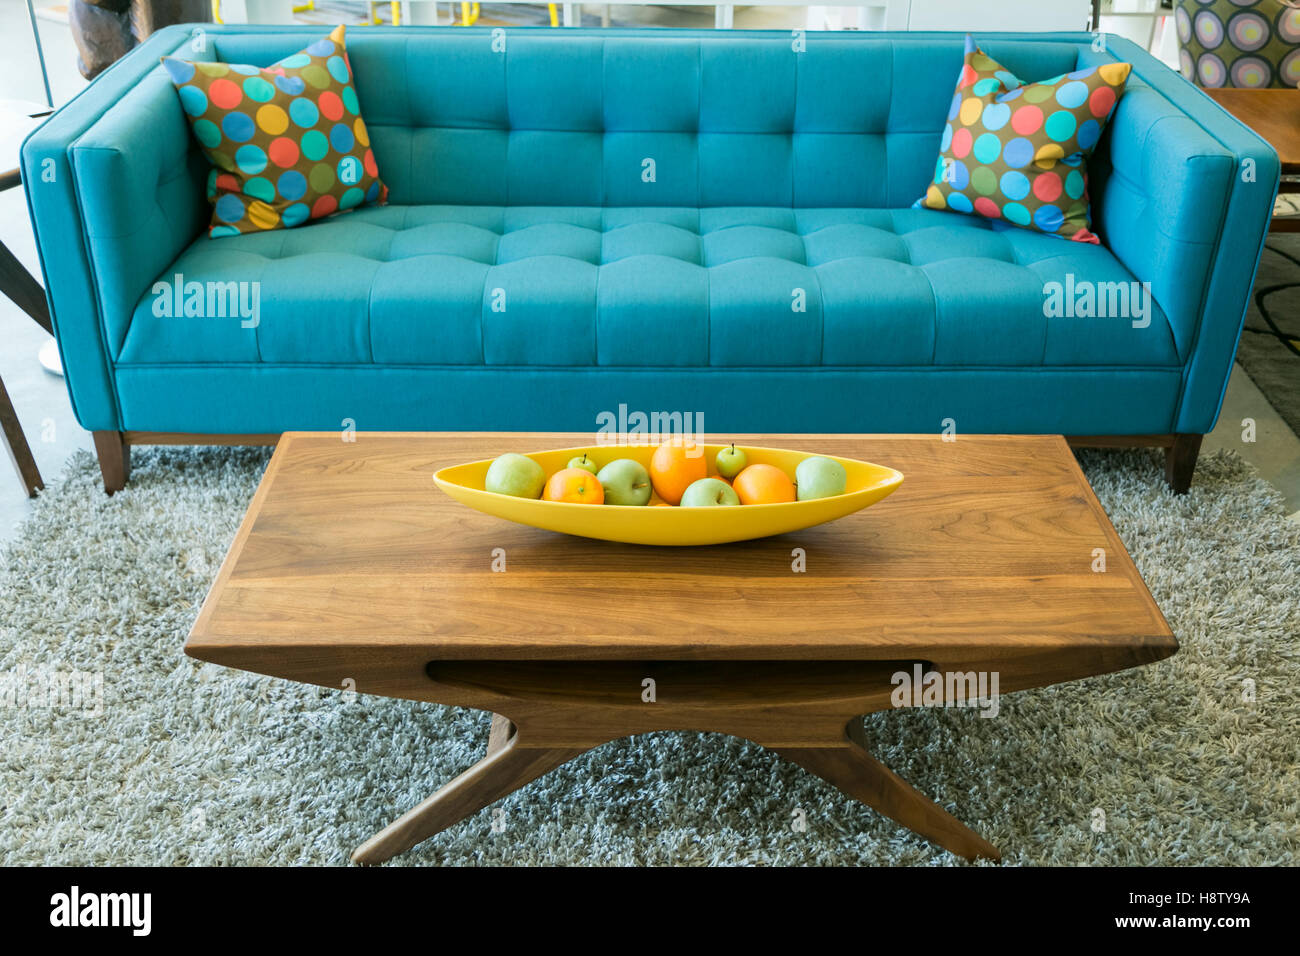 Mid Century blue sofa and wooden coffee table in Palm Springs, California, USA. Stock Photo